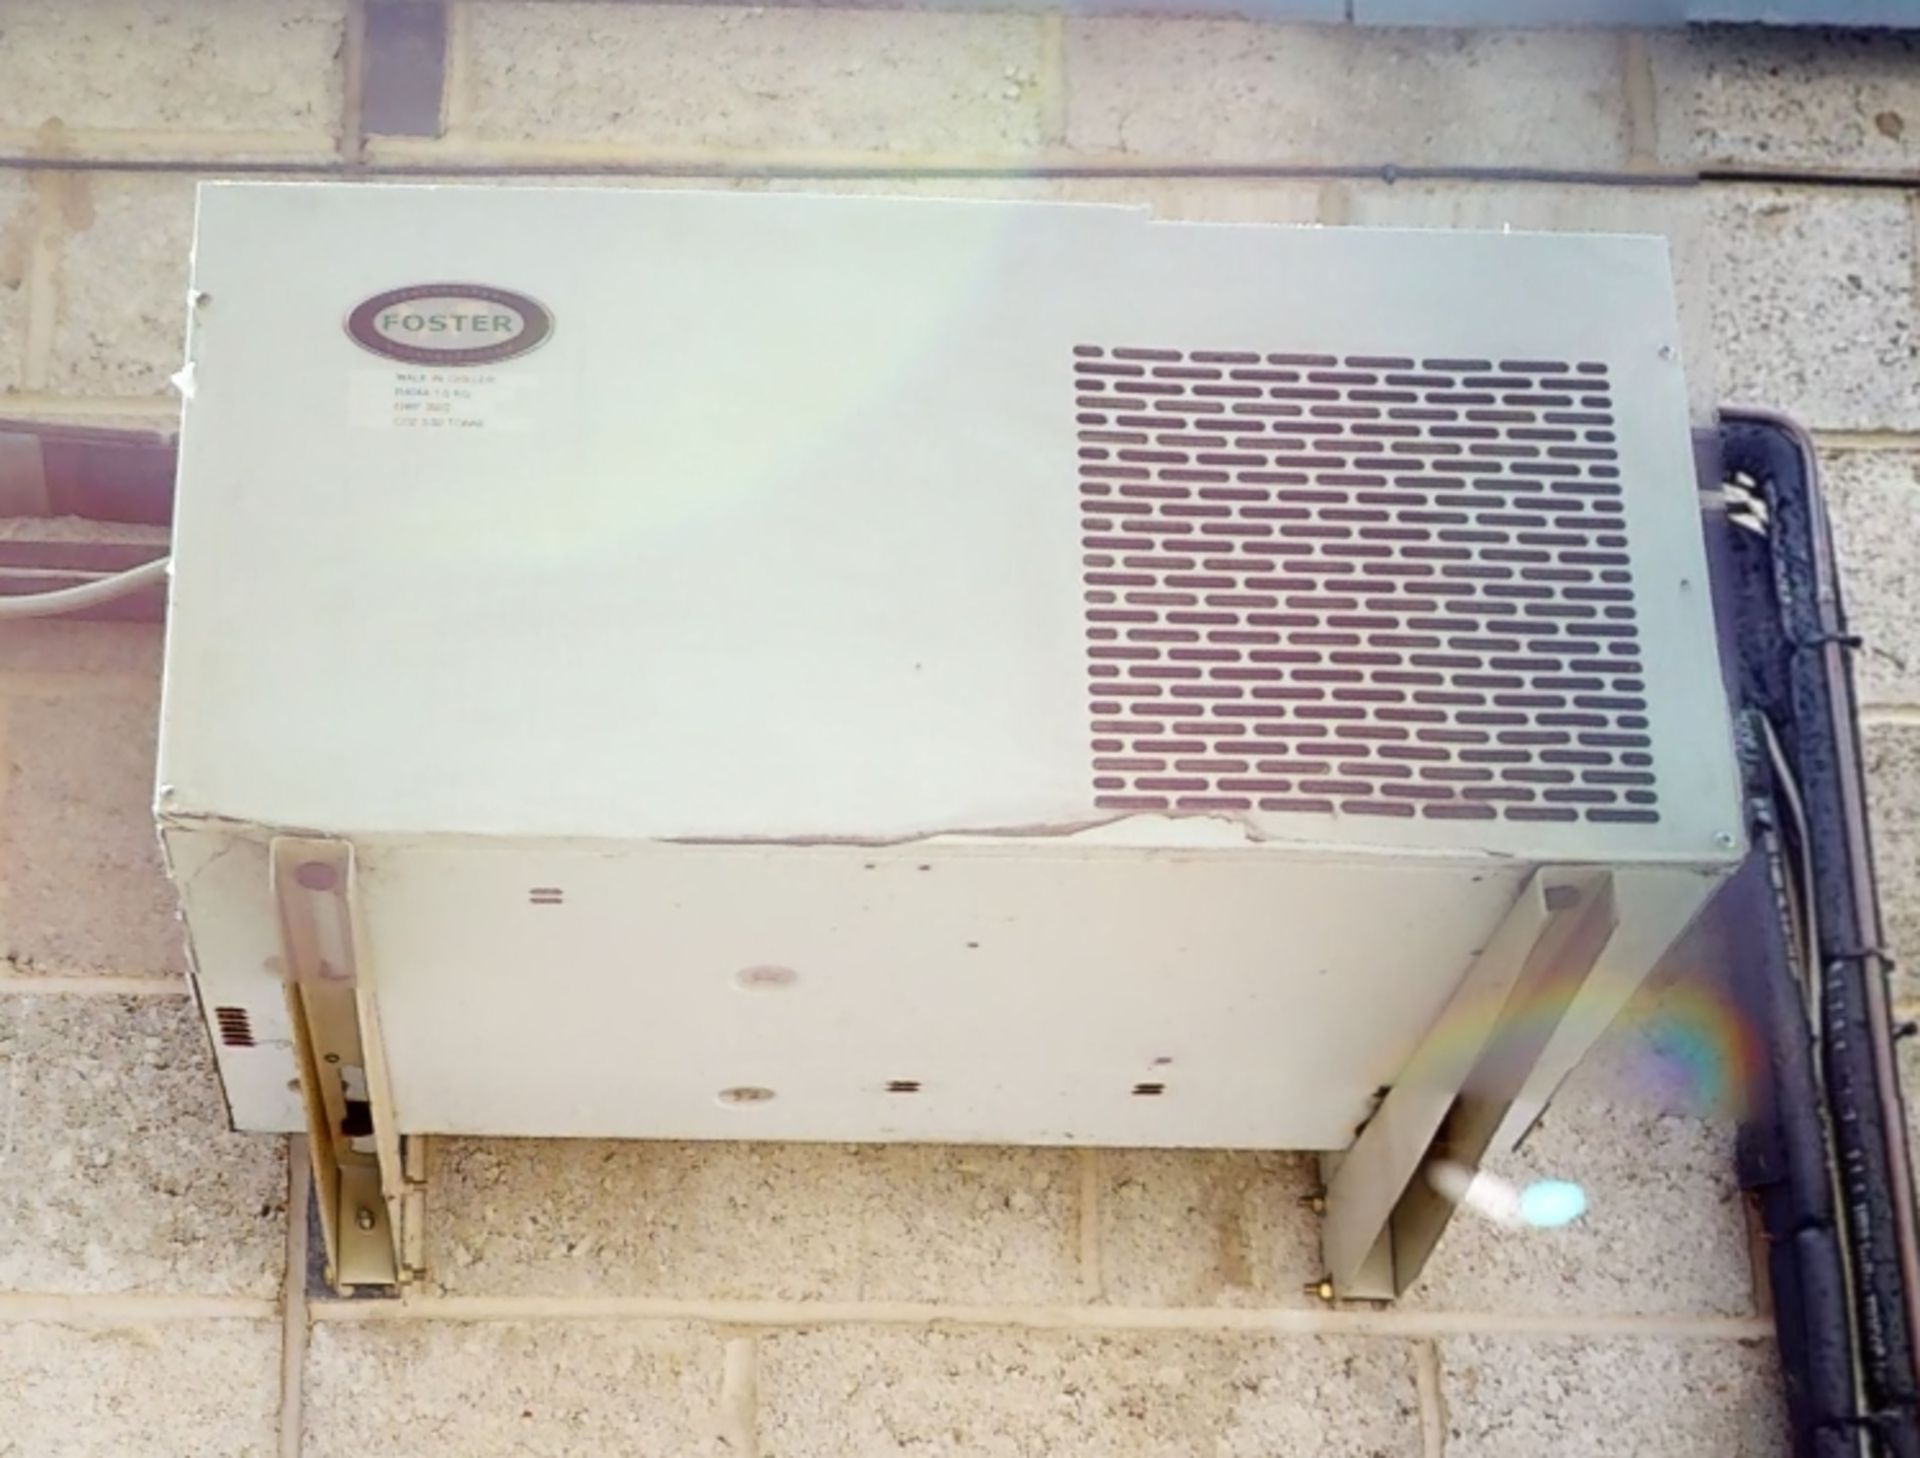 1 x Fosters Freezer Room Condensing Unit With Control Panel and Outdoor Unit - Model KEC25-6L - Image 3 of 7